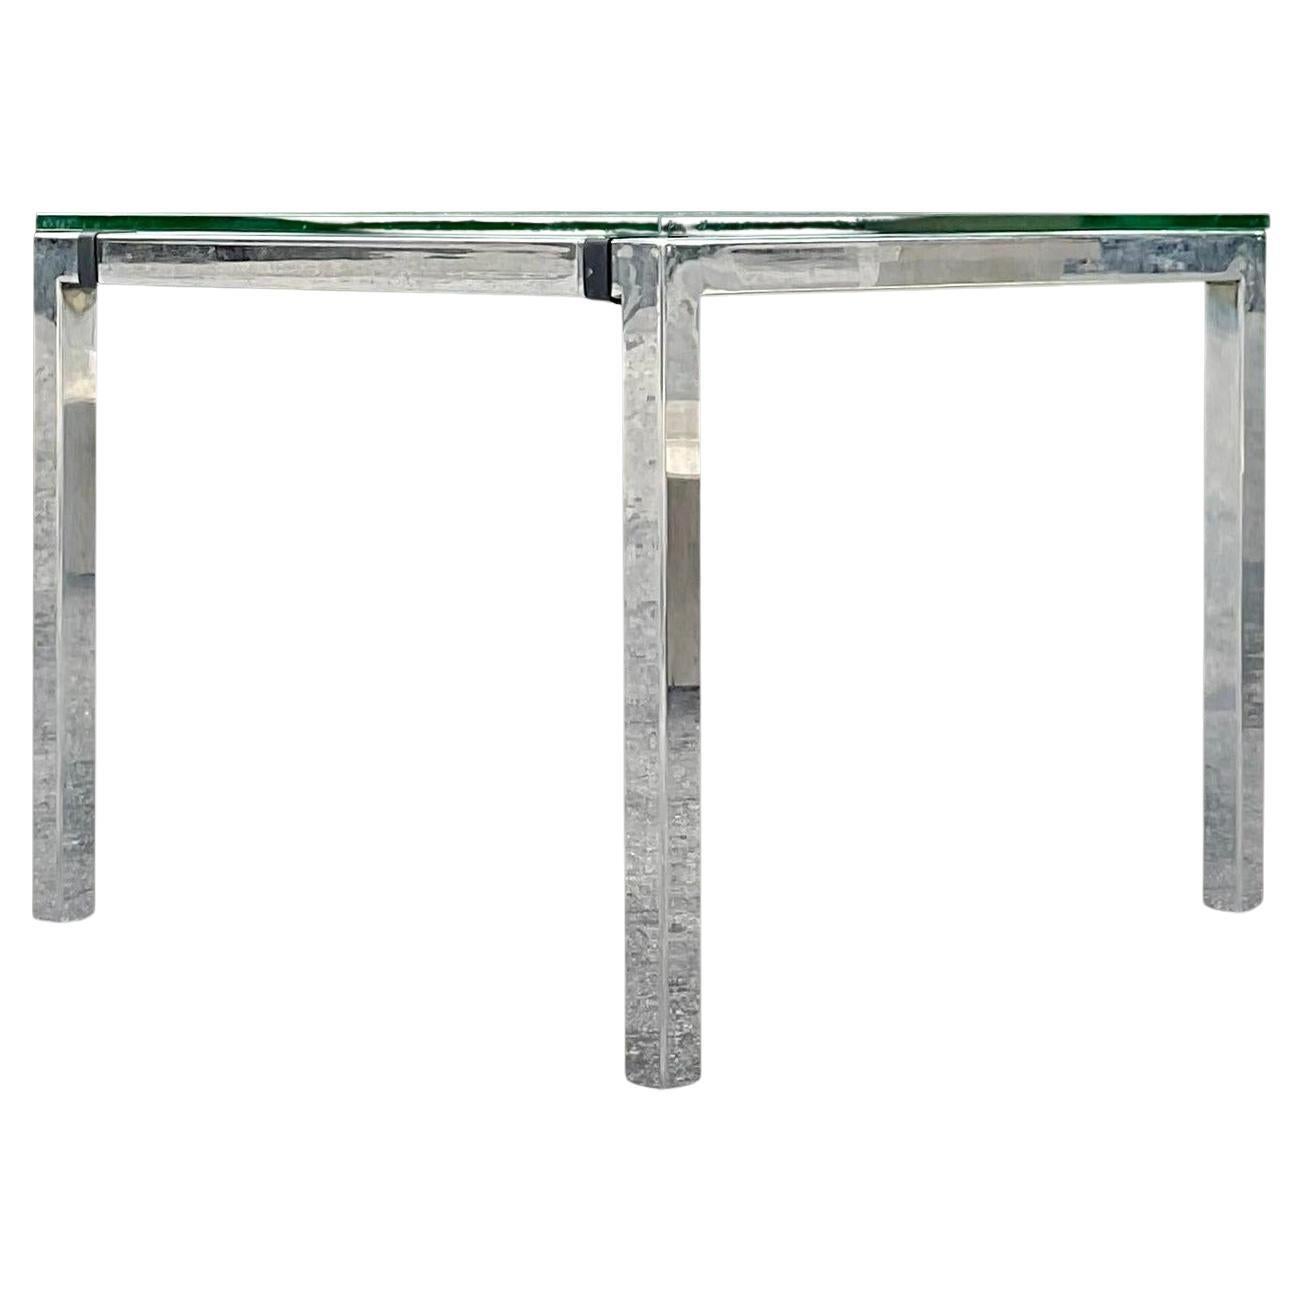 Mid 20th Century Vintage Boho Polished Chrome Game Table After Milo Baughman For Sale